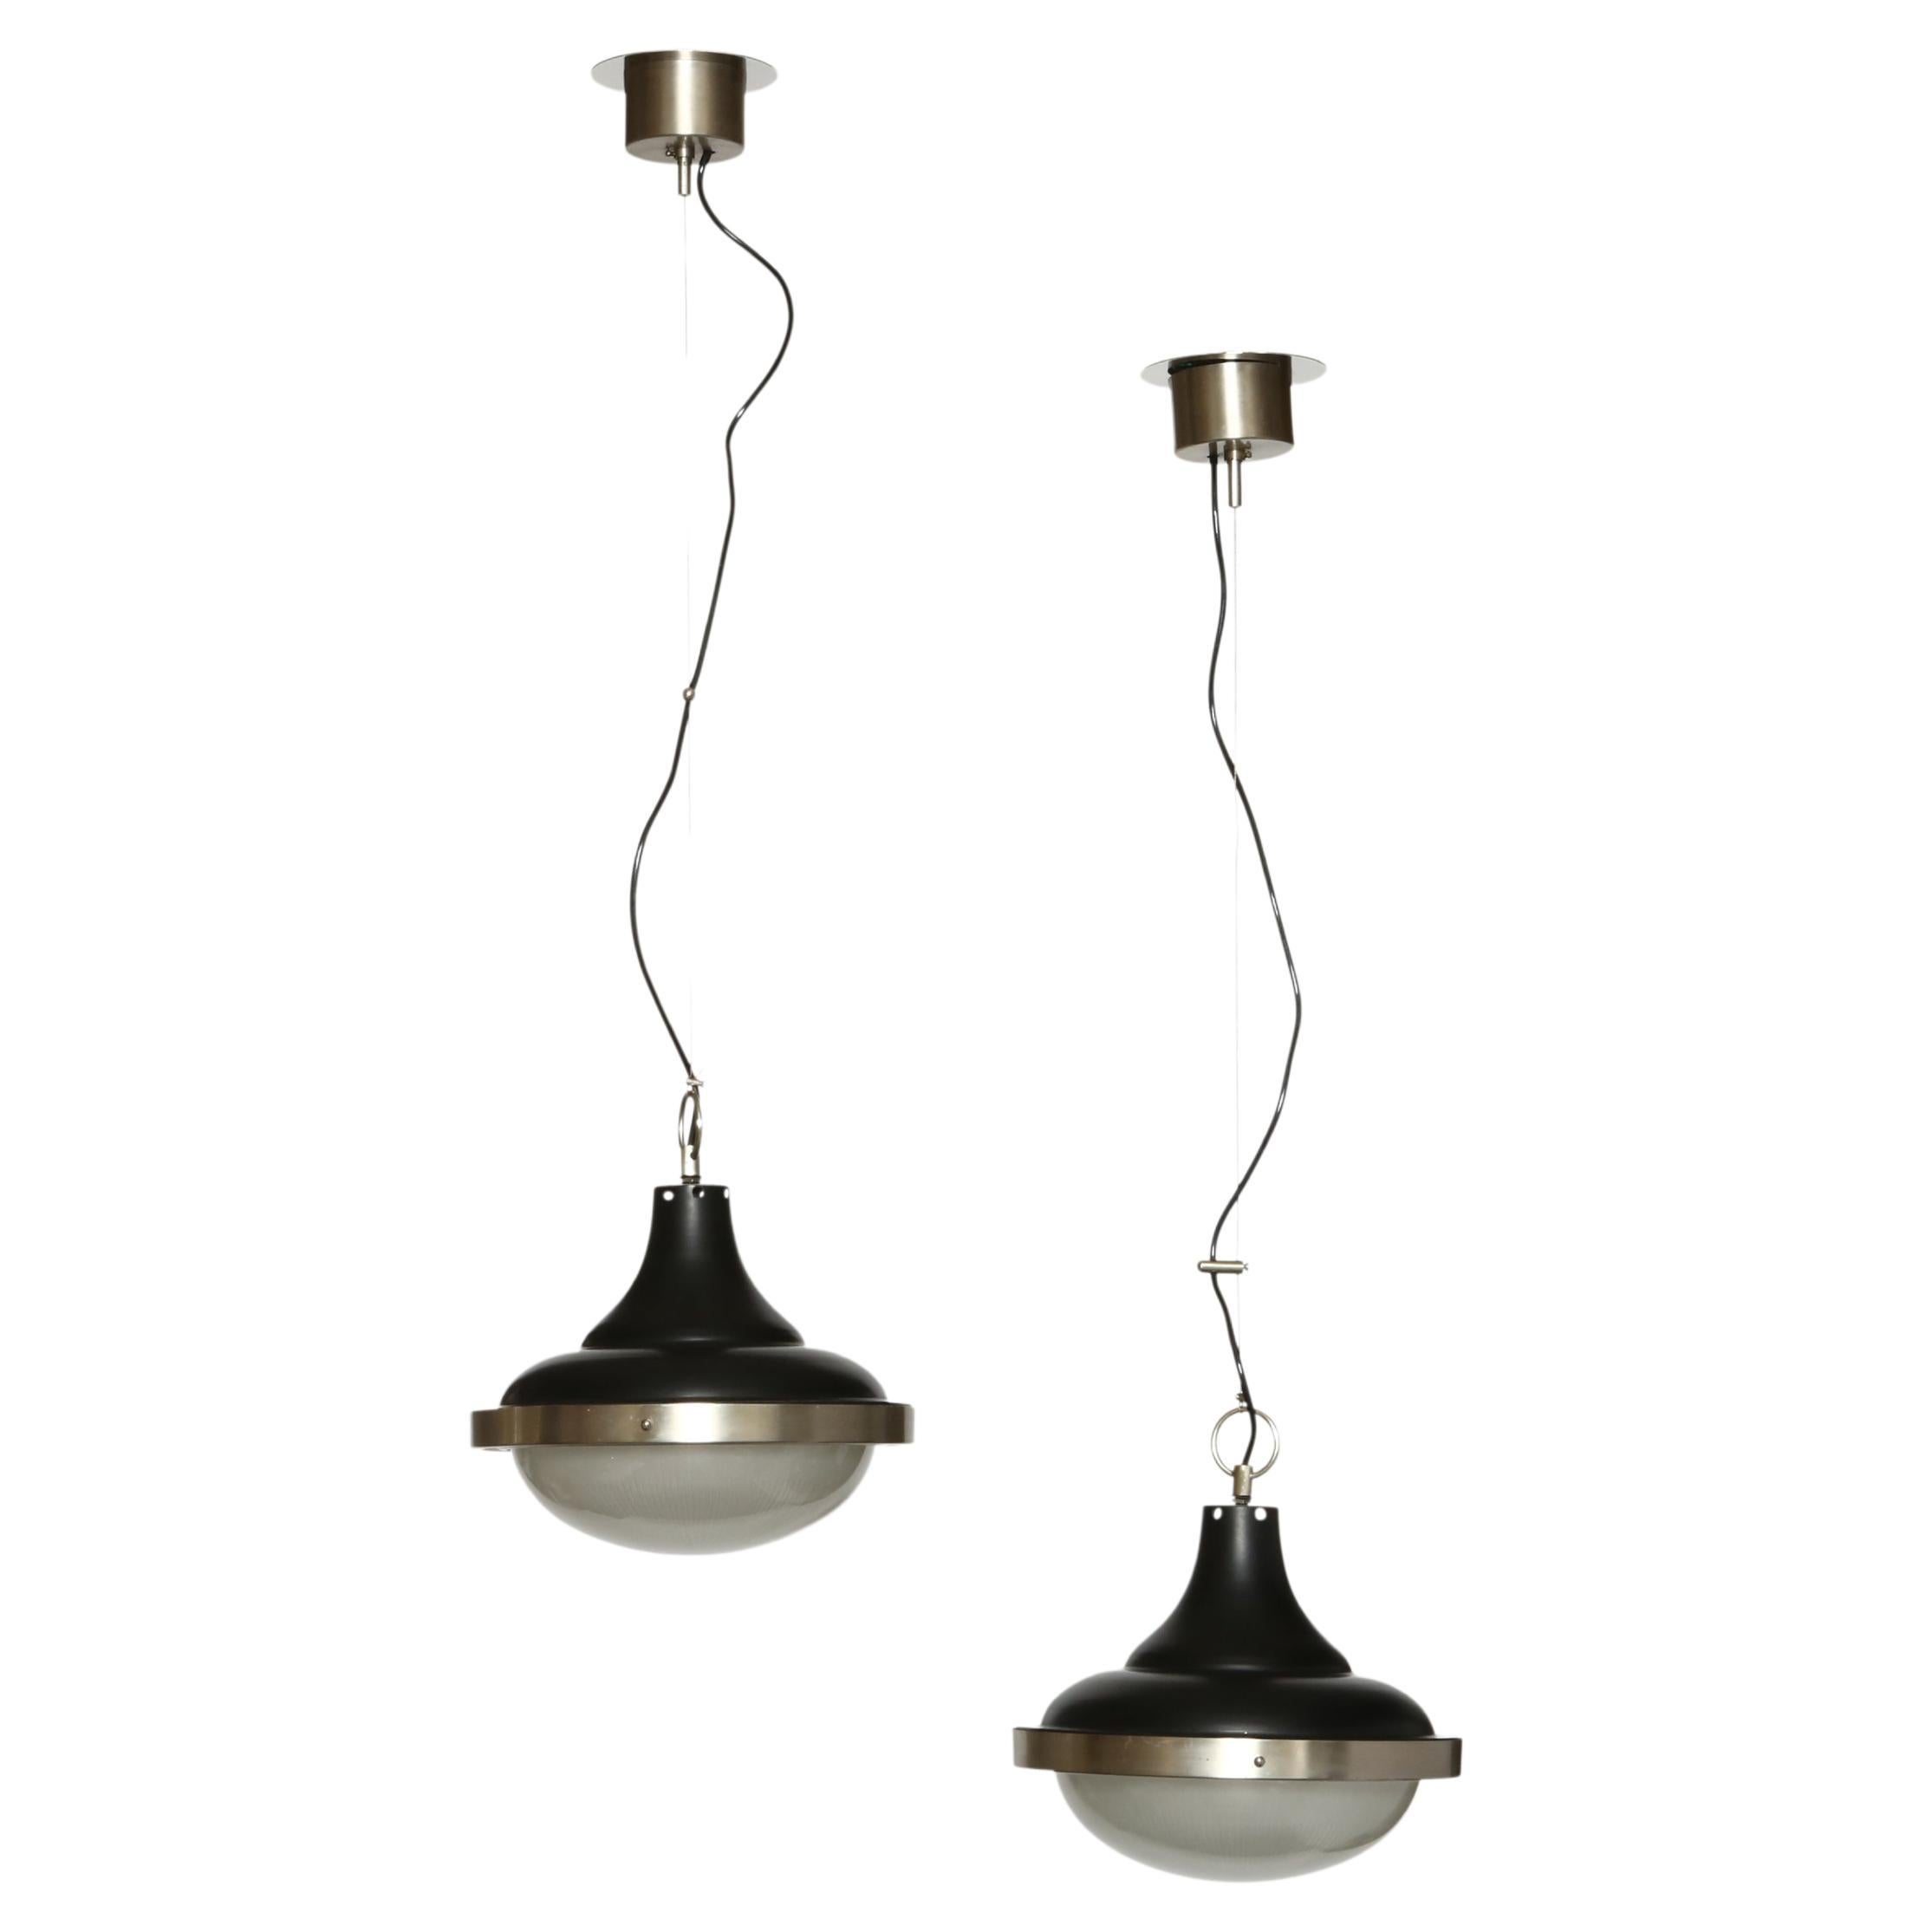 Sergio Mazza Style Ceiling Pendants, a Pair For Sale